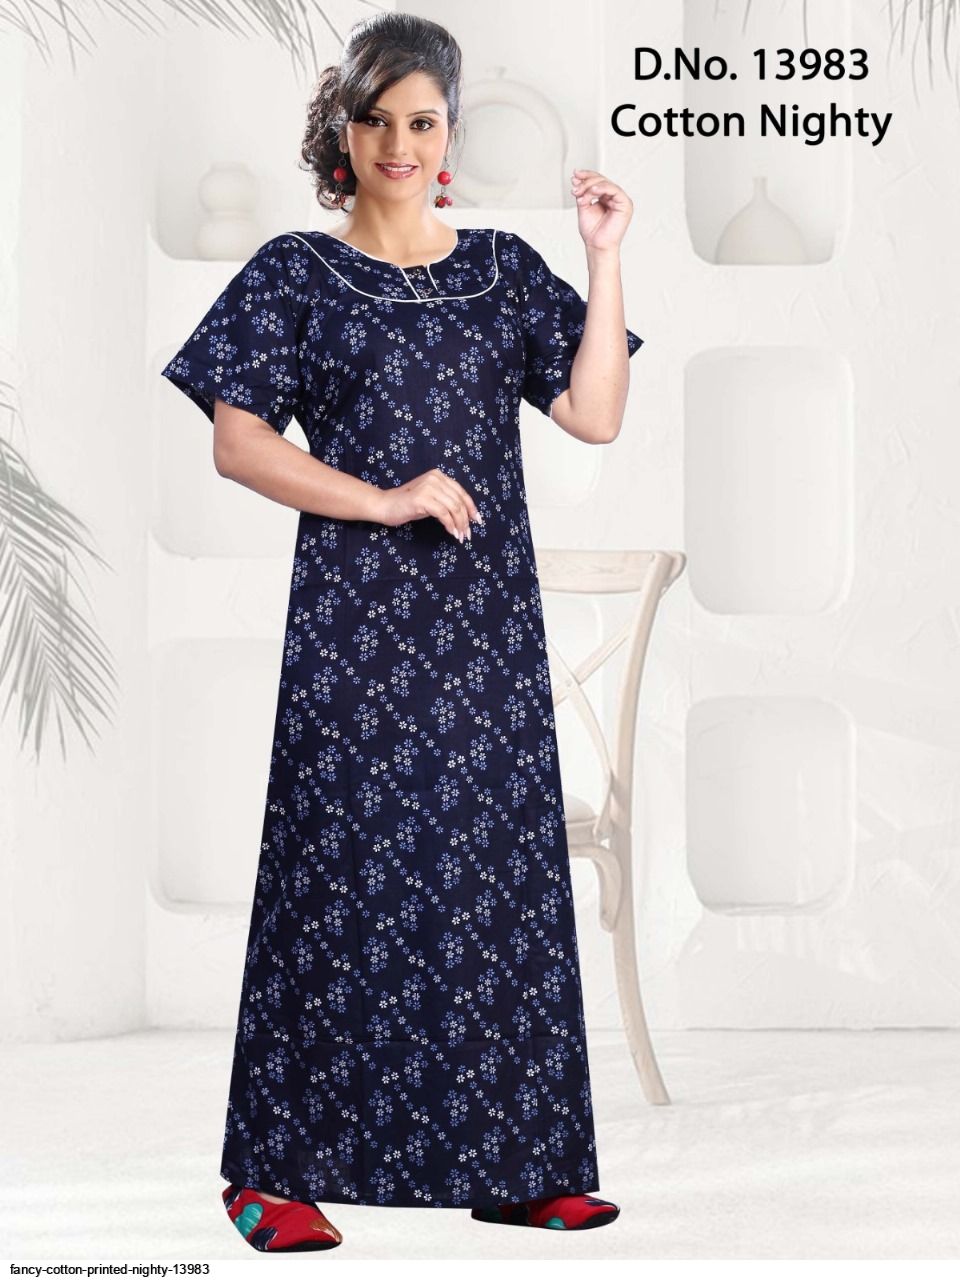 Pattern: Printed Ladies Cotton Nighty, Blue at Rs 1199/piece in Surat